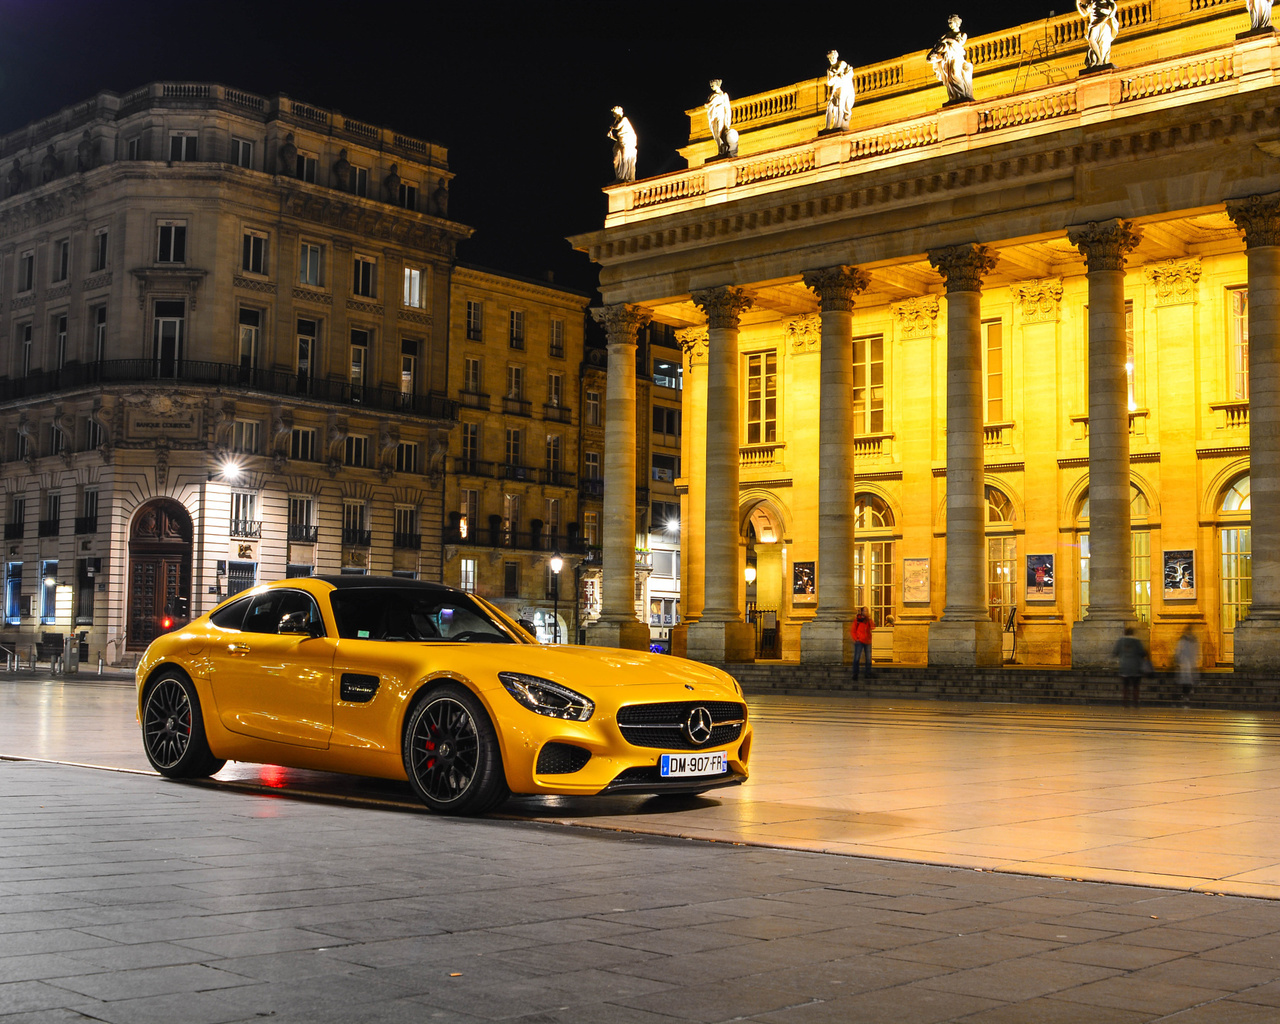 mercedes-benz, amg, gt s, 2015, yellow, supercar, front, night, place, square, 